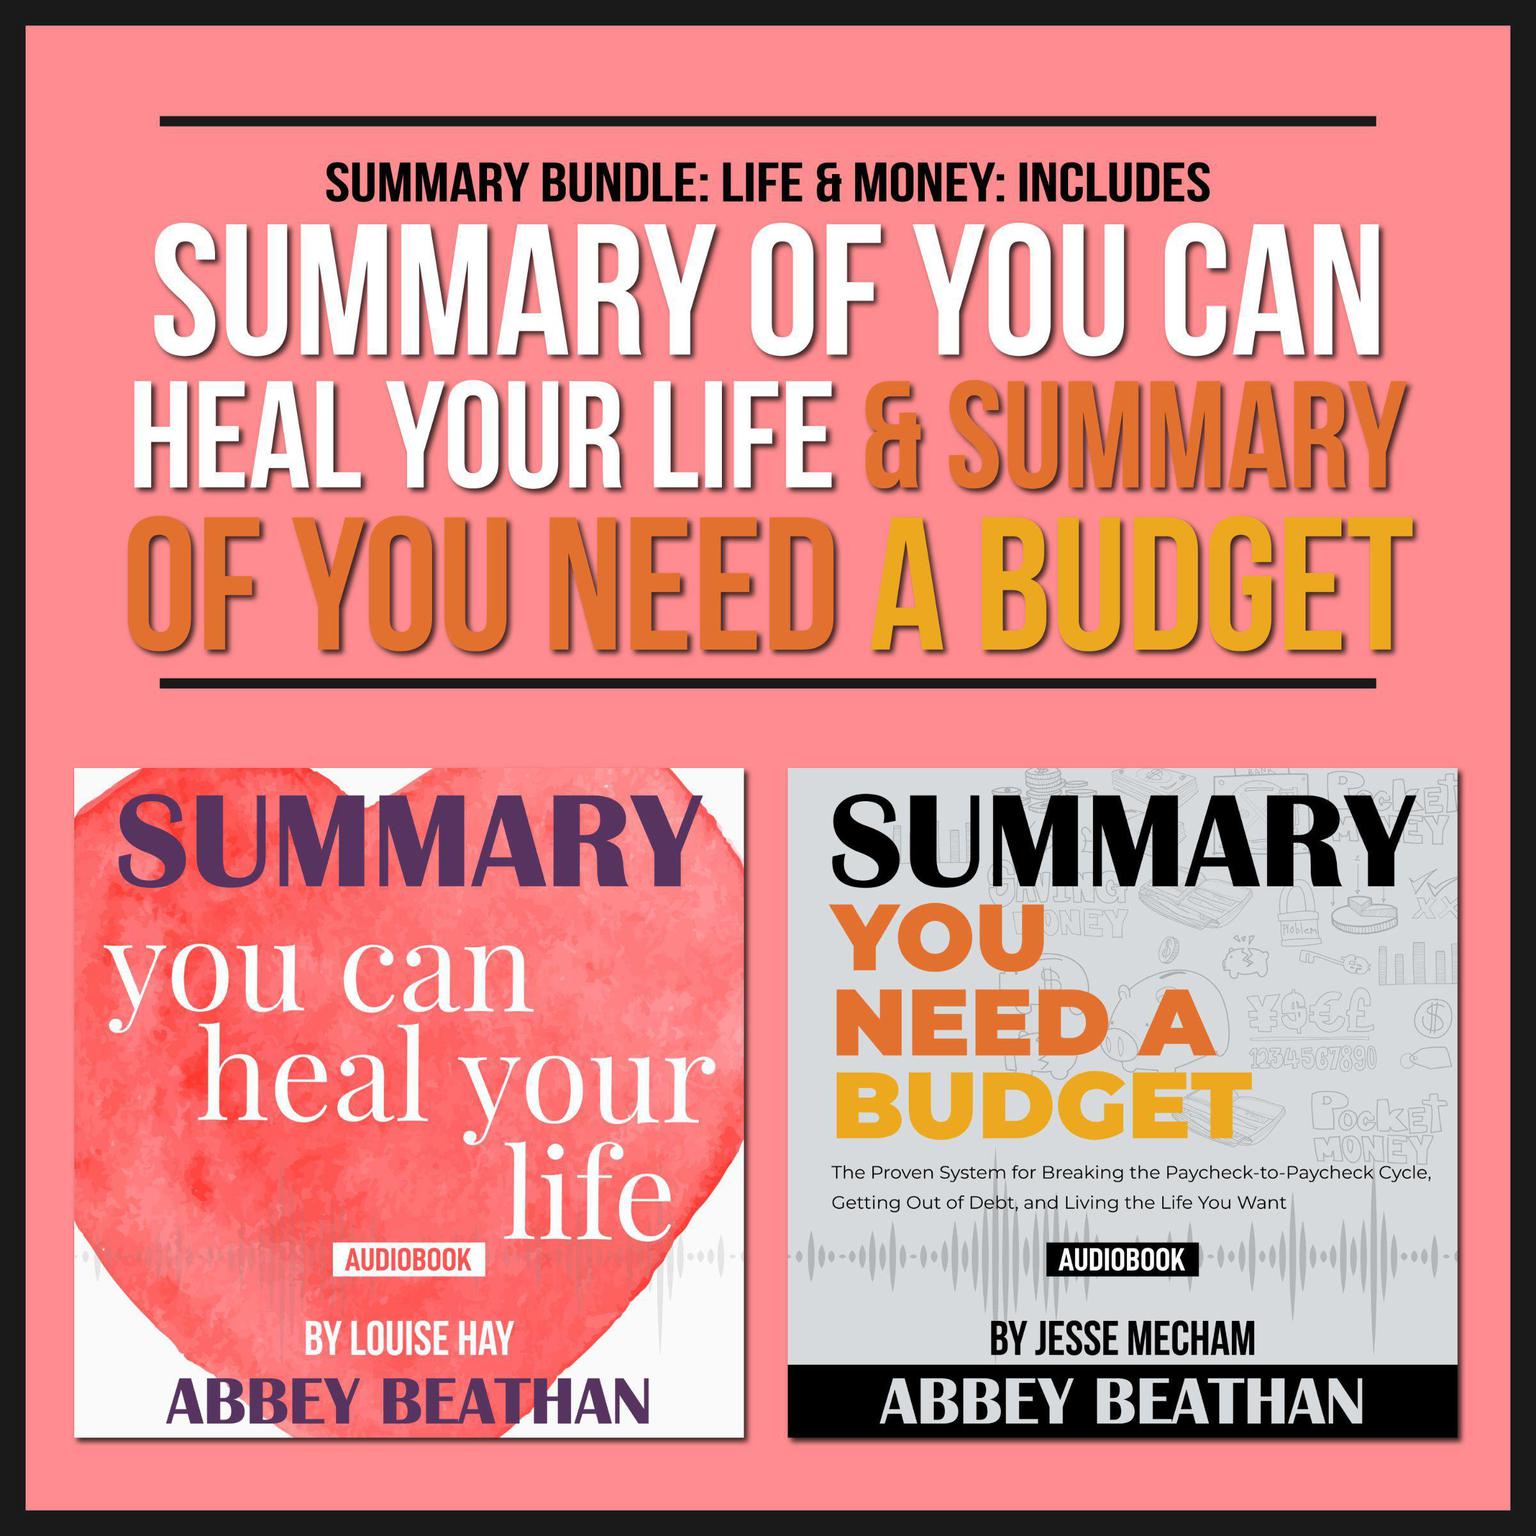 Summary Bundle: Life & Money: Includes Summary of You Can Heal Your Life & Summary of You Need a Budget Audiobook, by Abbey Beathan